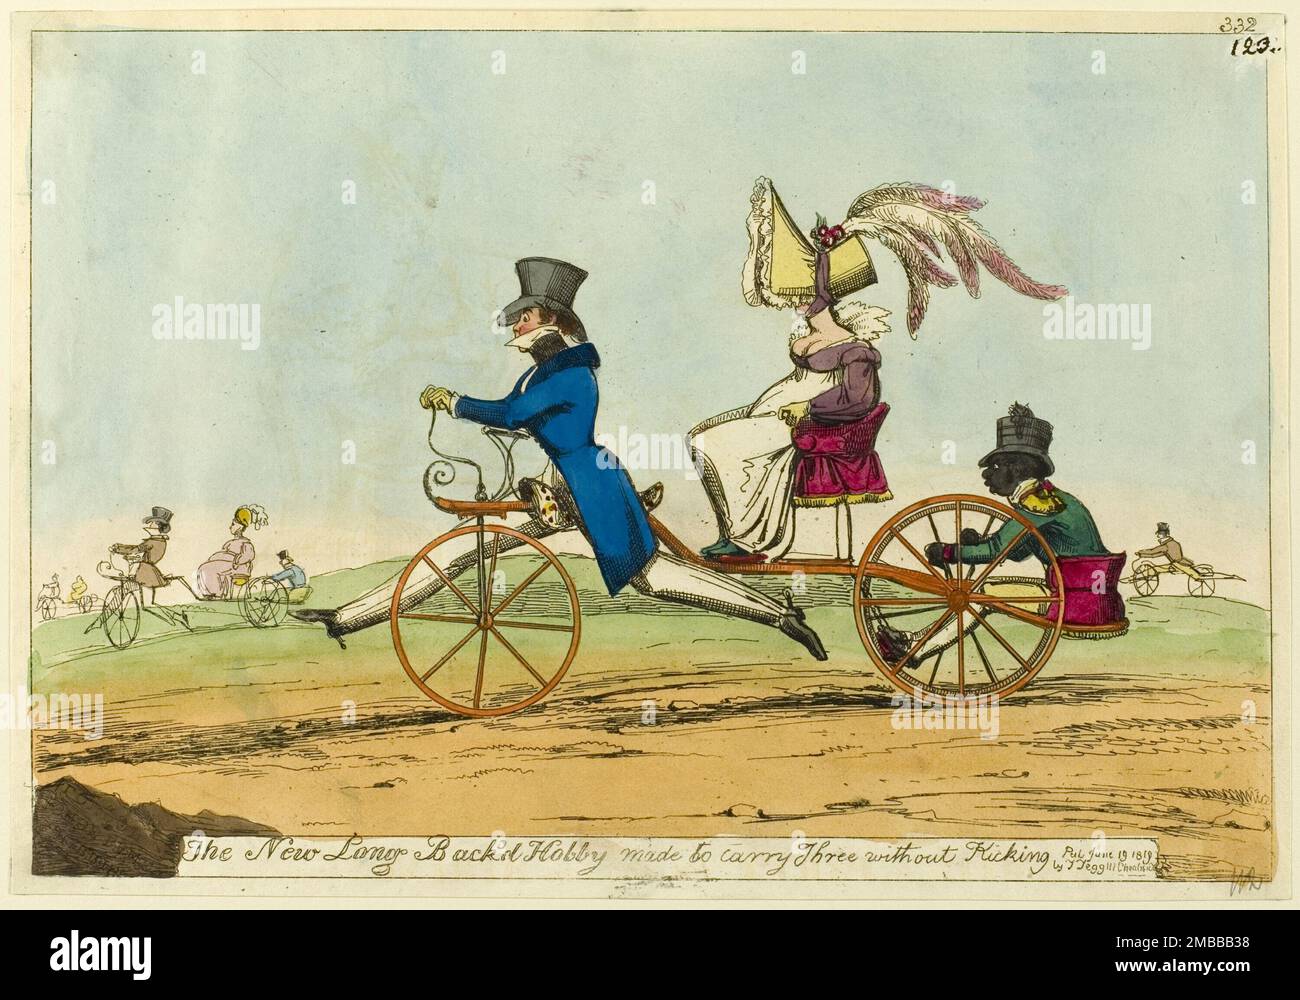 The New Long Back'd Hobby made to carry Three without Kicking, published June 19, 1819. A hobby horse (a forerunner of the bicycle) adapted to carry a passenger, with a Black servant (or slave) at the rear. Attributed to William Heath. Stock Photo